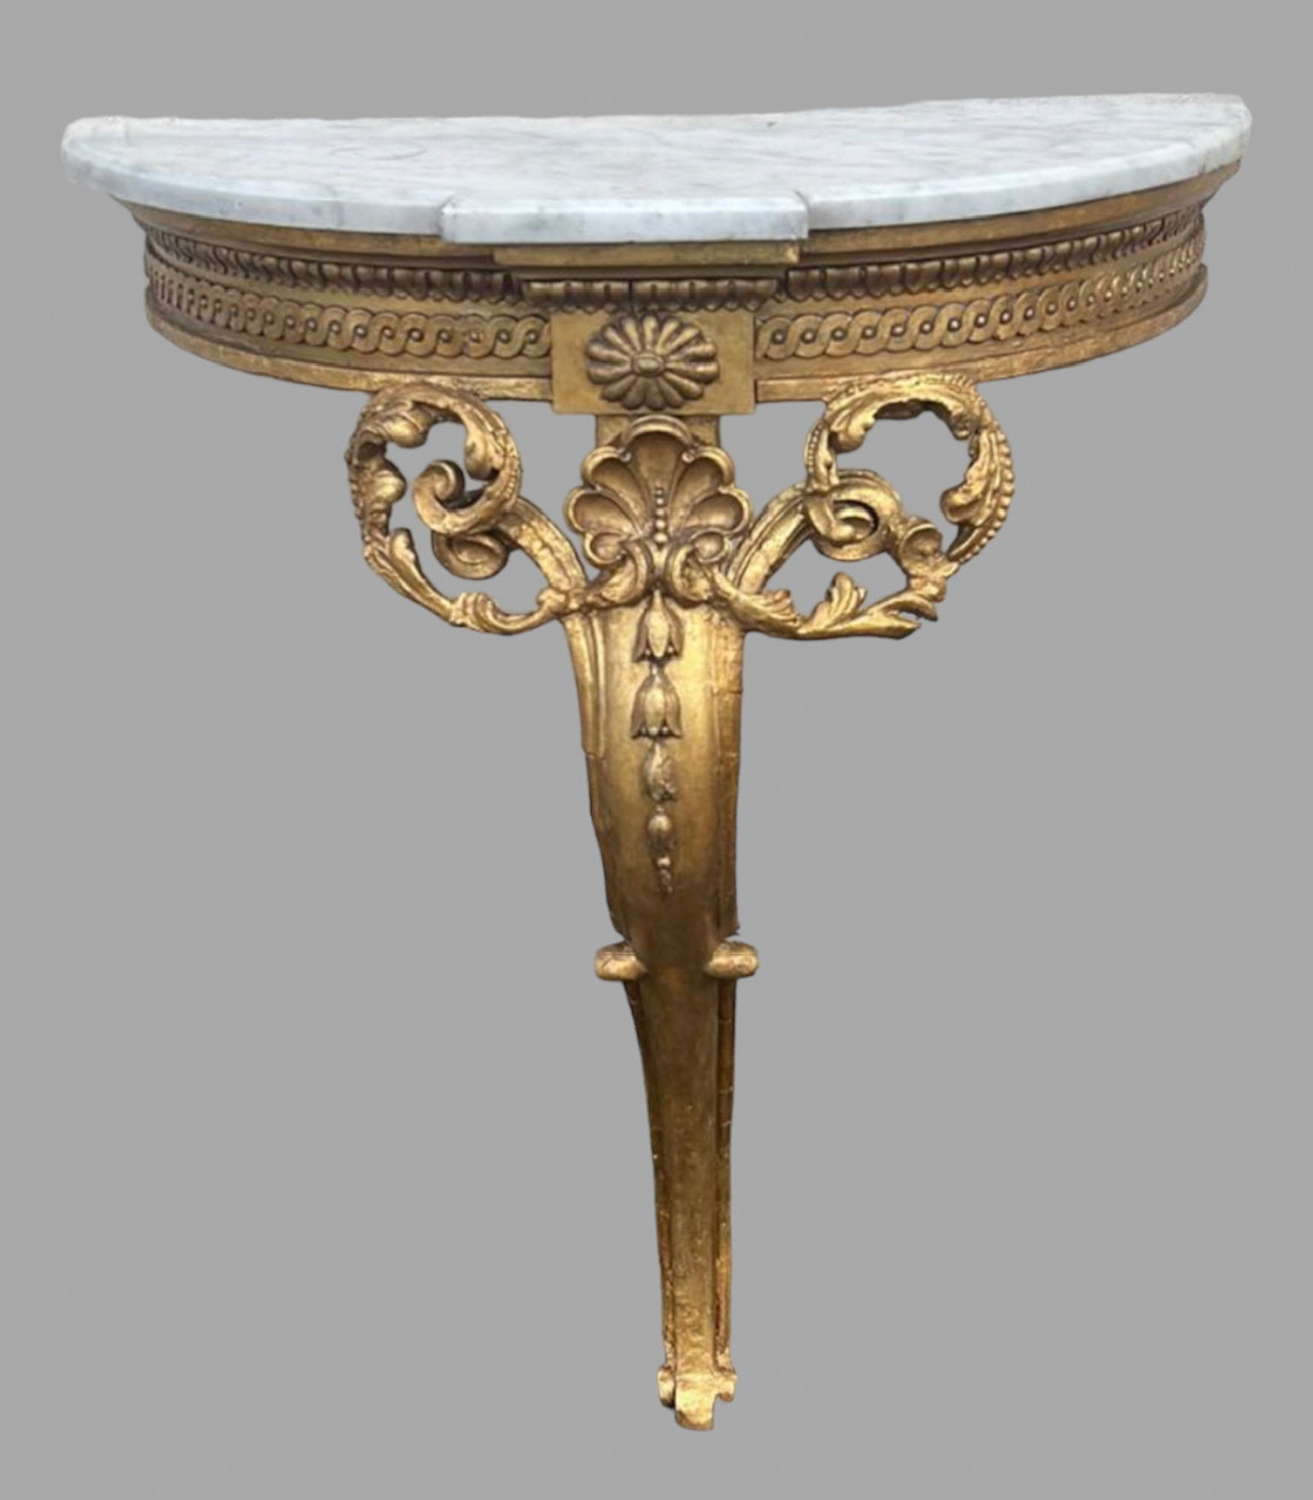 A Late 18thc Rococo Style Gilded Console Table